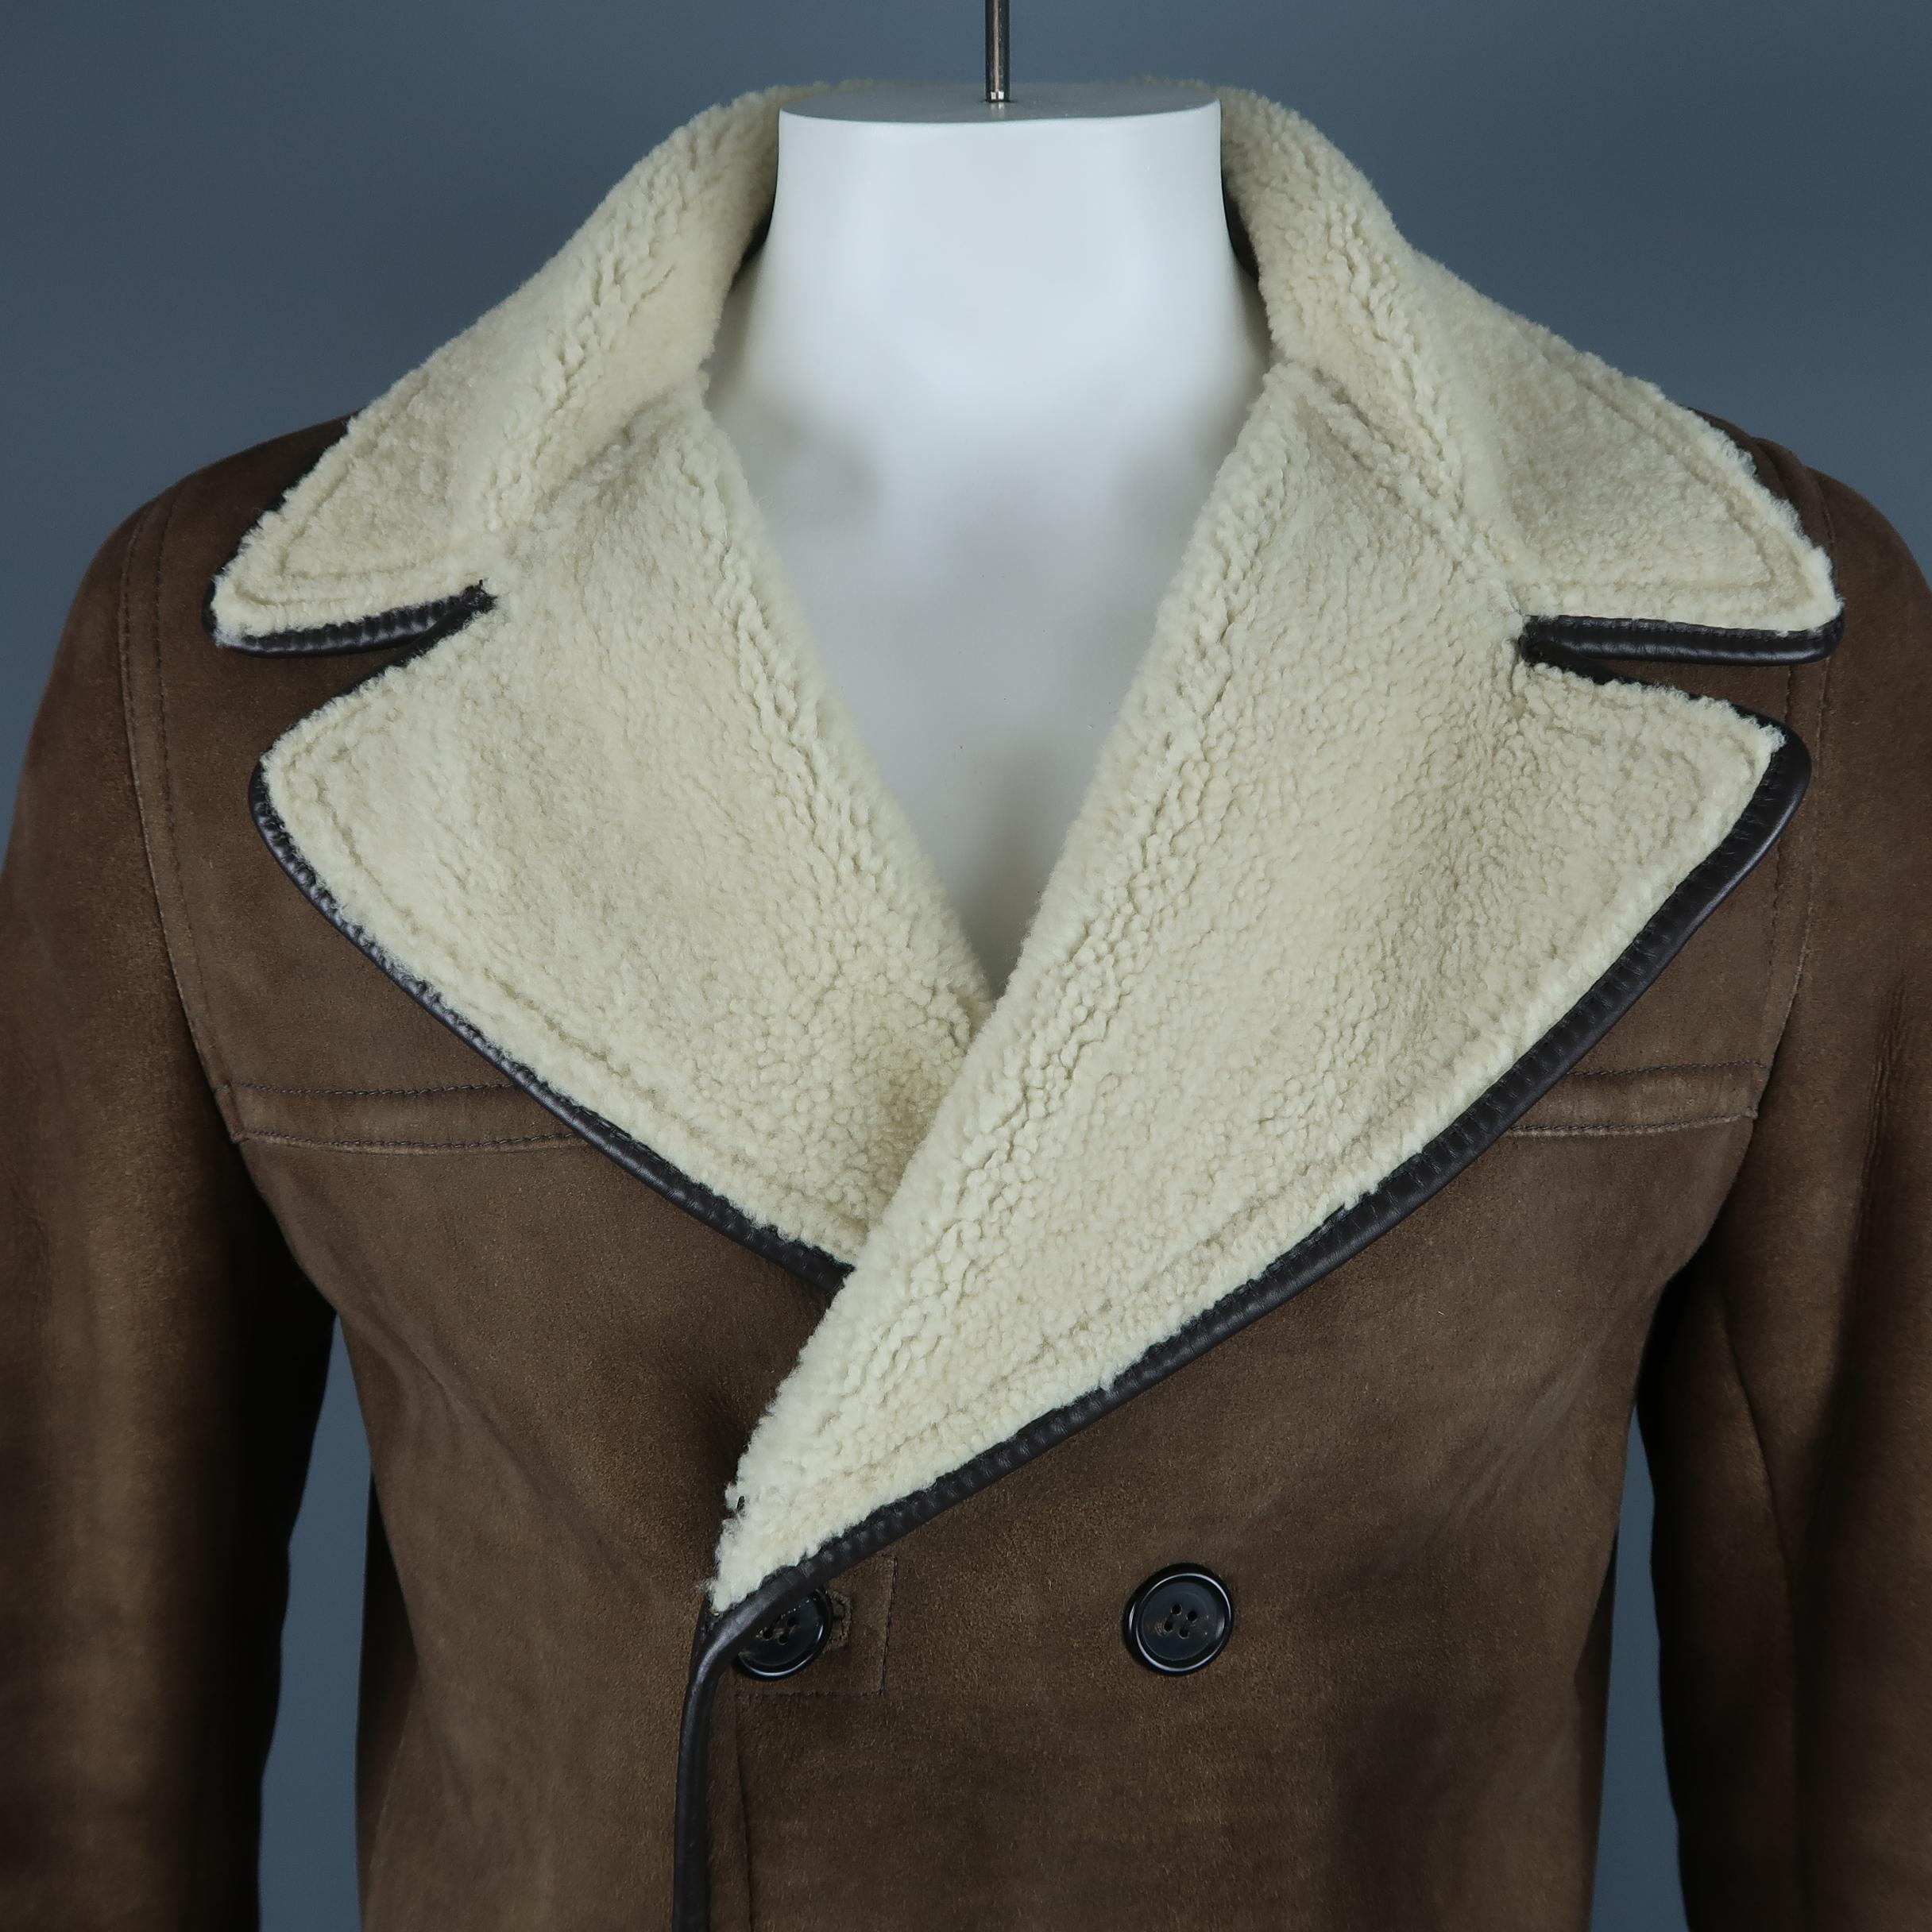 Double breasted PRADA coat comes in light brown shearling with cream fur liner, pointed lapel, and brown leather piping. Discolorations throughout. As-is. Made in Italy.
 
Fair Pre-Owned Condition.
Marked: IT 54
 
Measurements:
 
Shoulder: 18